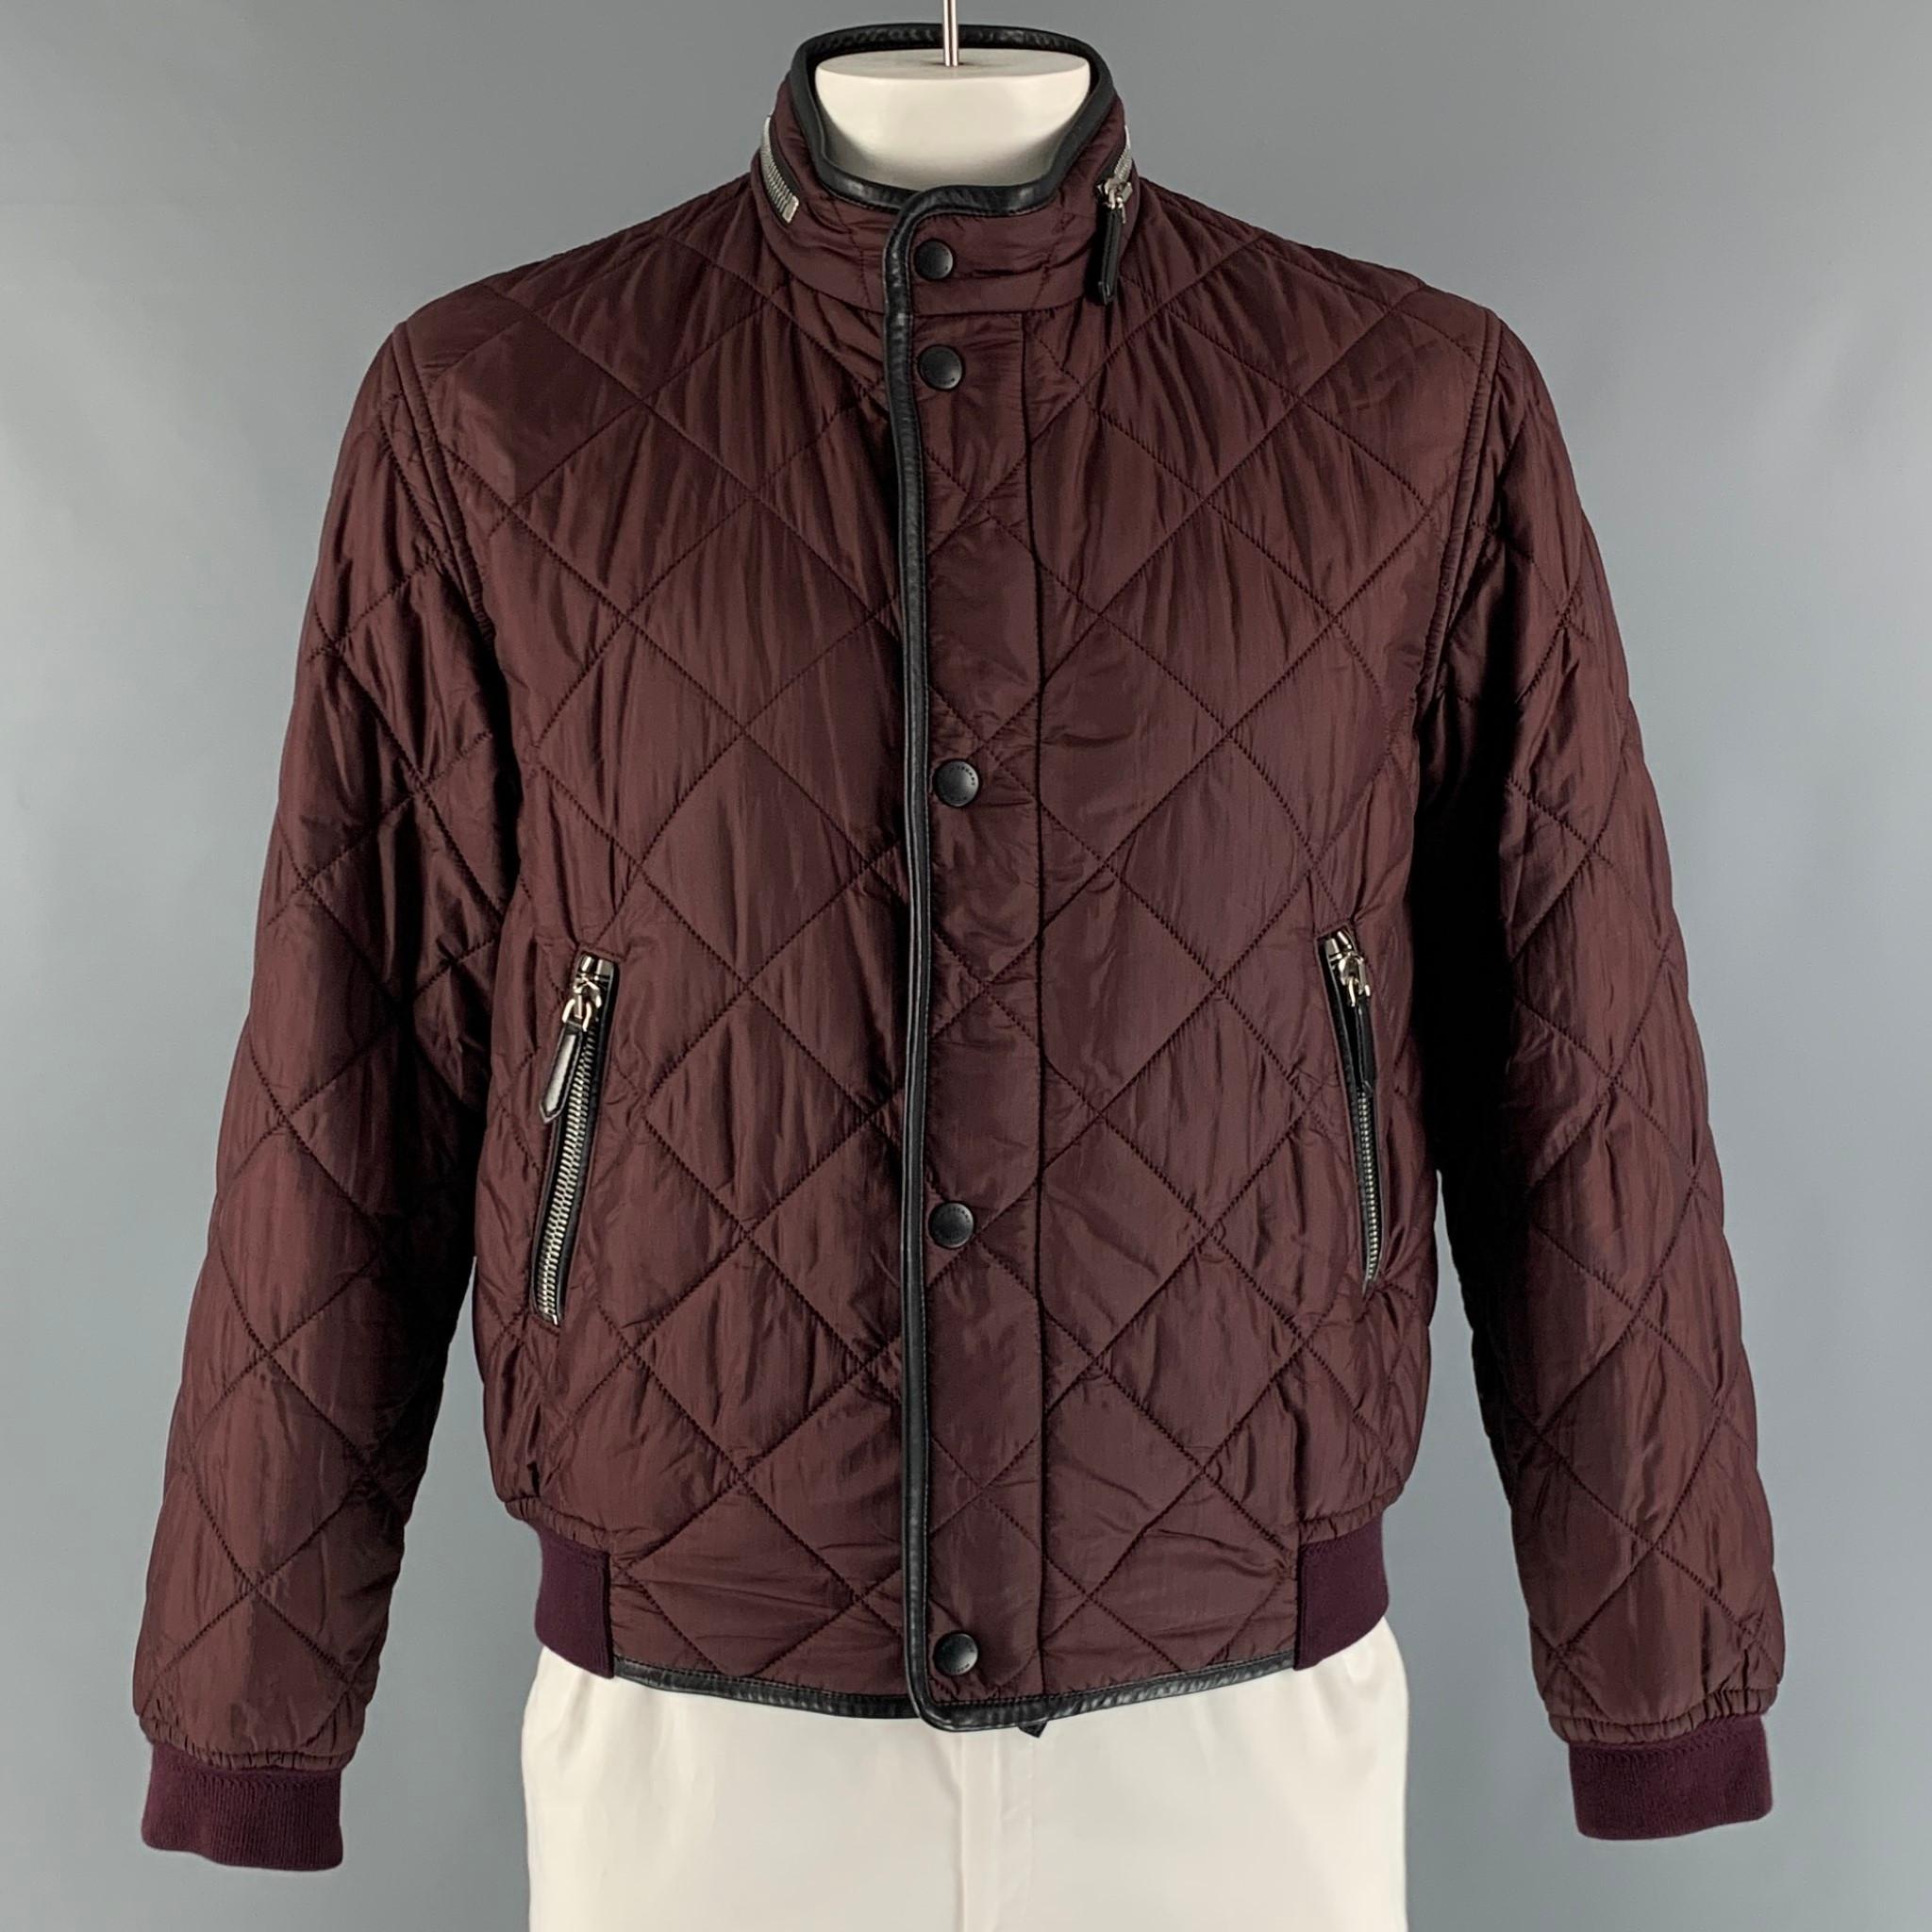 Burberry Prorsum Spring 2016 Puffer Jacket by Christopher Bailey comes in burgundy nylon woven material features a deconstructed lining, leather trim embellishment, built -in hood at collar,  zip pockets & zip closure. Made in Italy.

Excellent